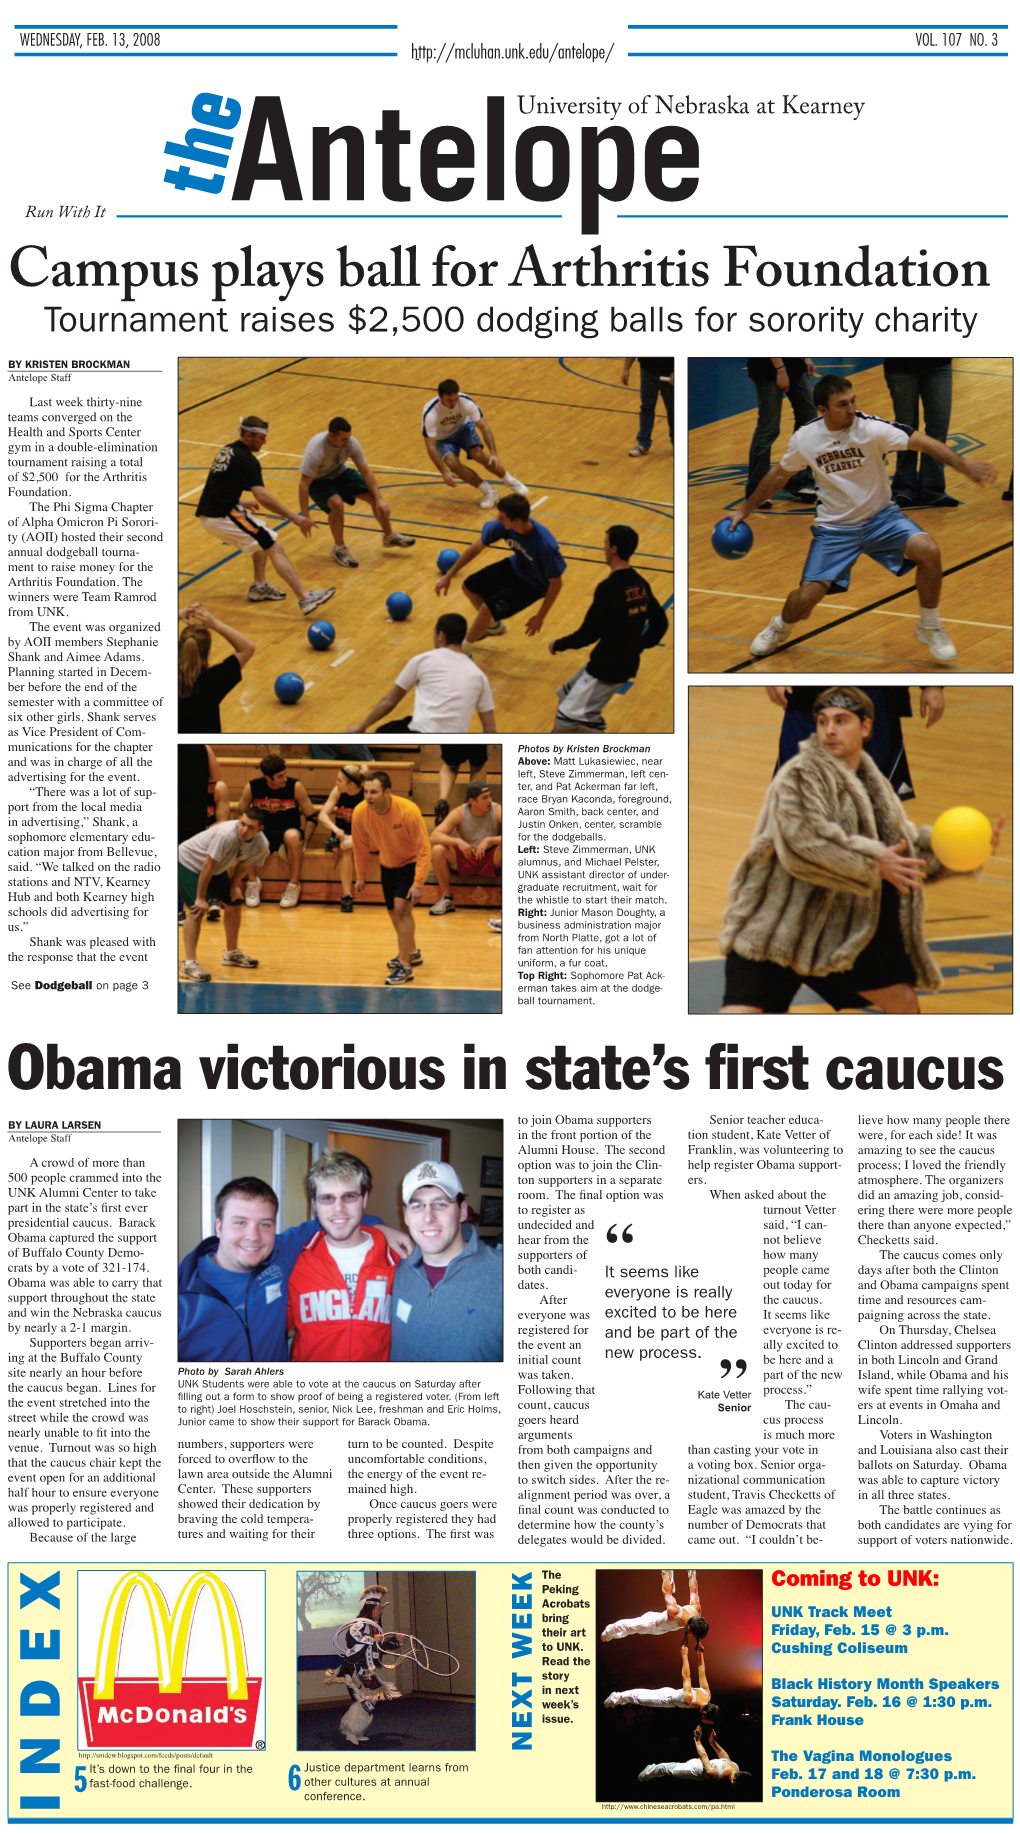 Obama Victorious in State's First Caucus